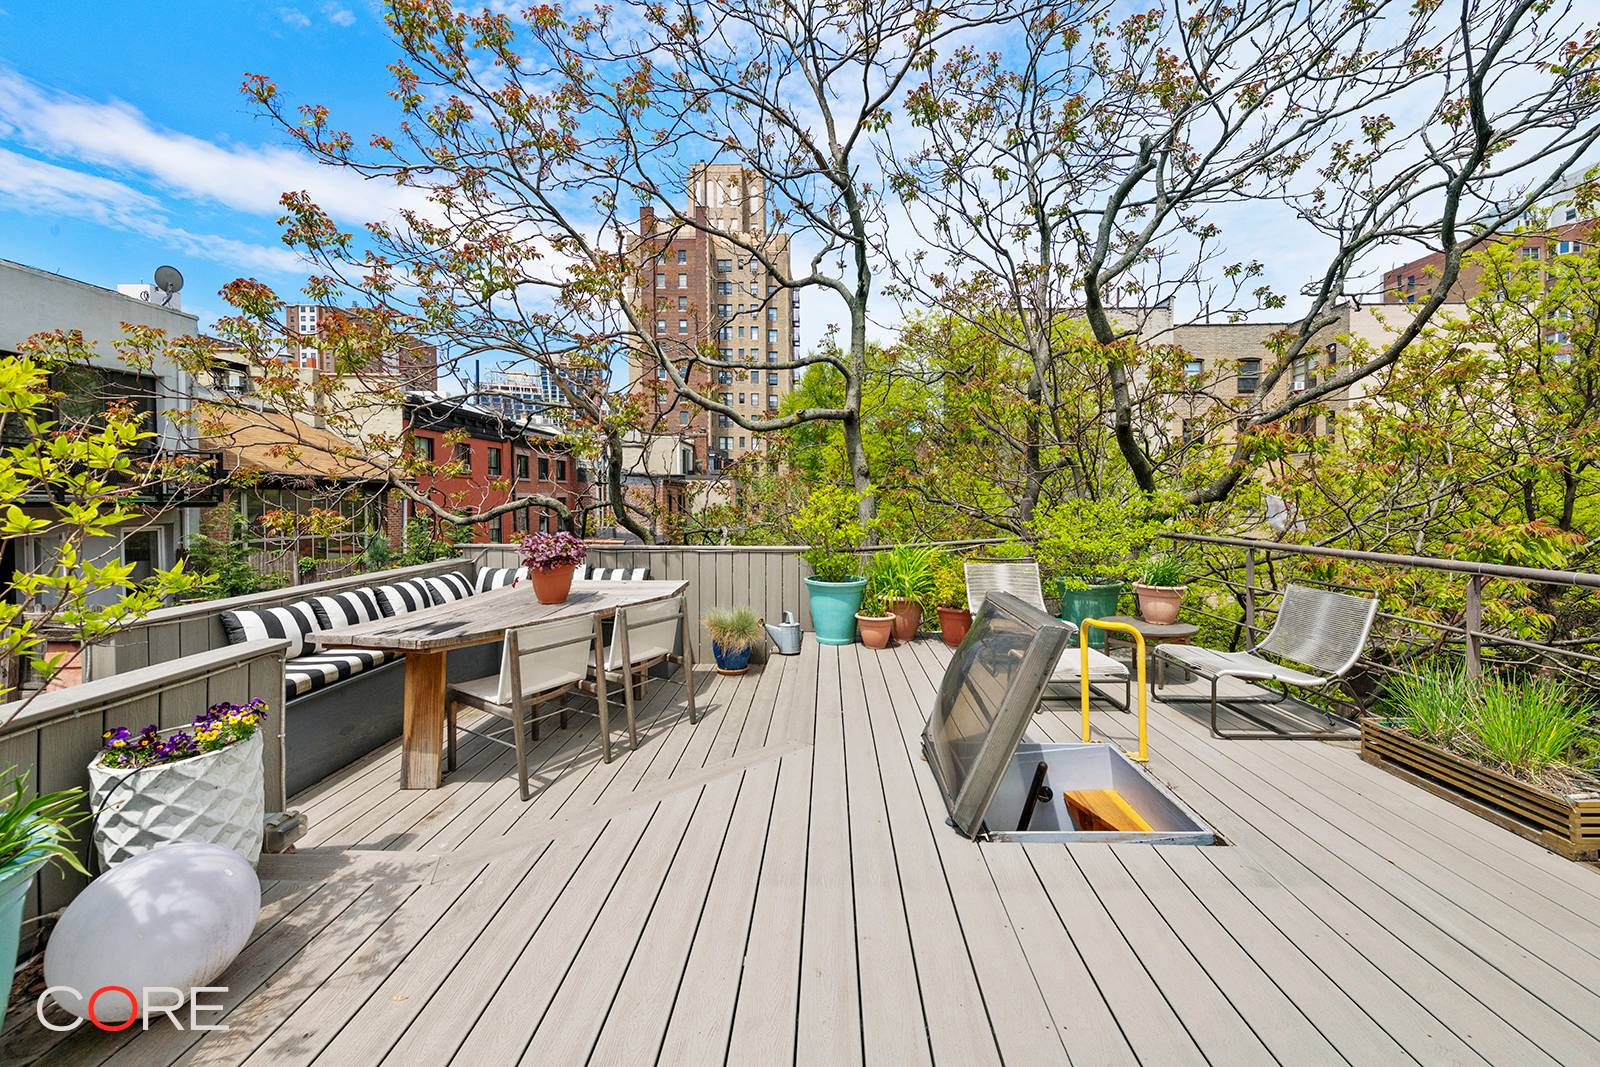 Rare opportunity to live in this romantic penthouse home that is located on one of the nicest, tree lined blocks in historic West Chelsea.